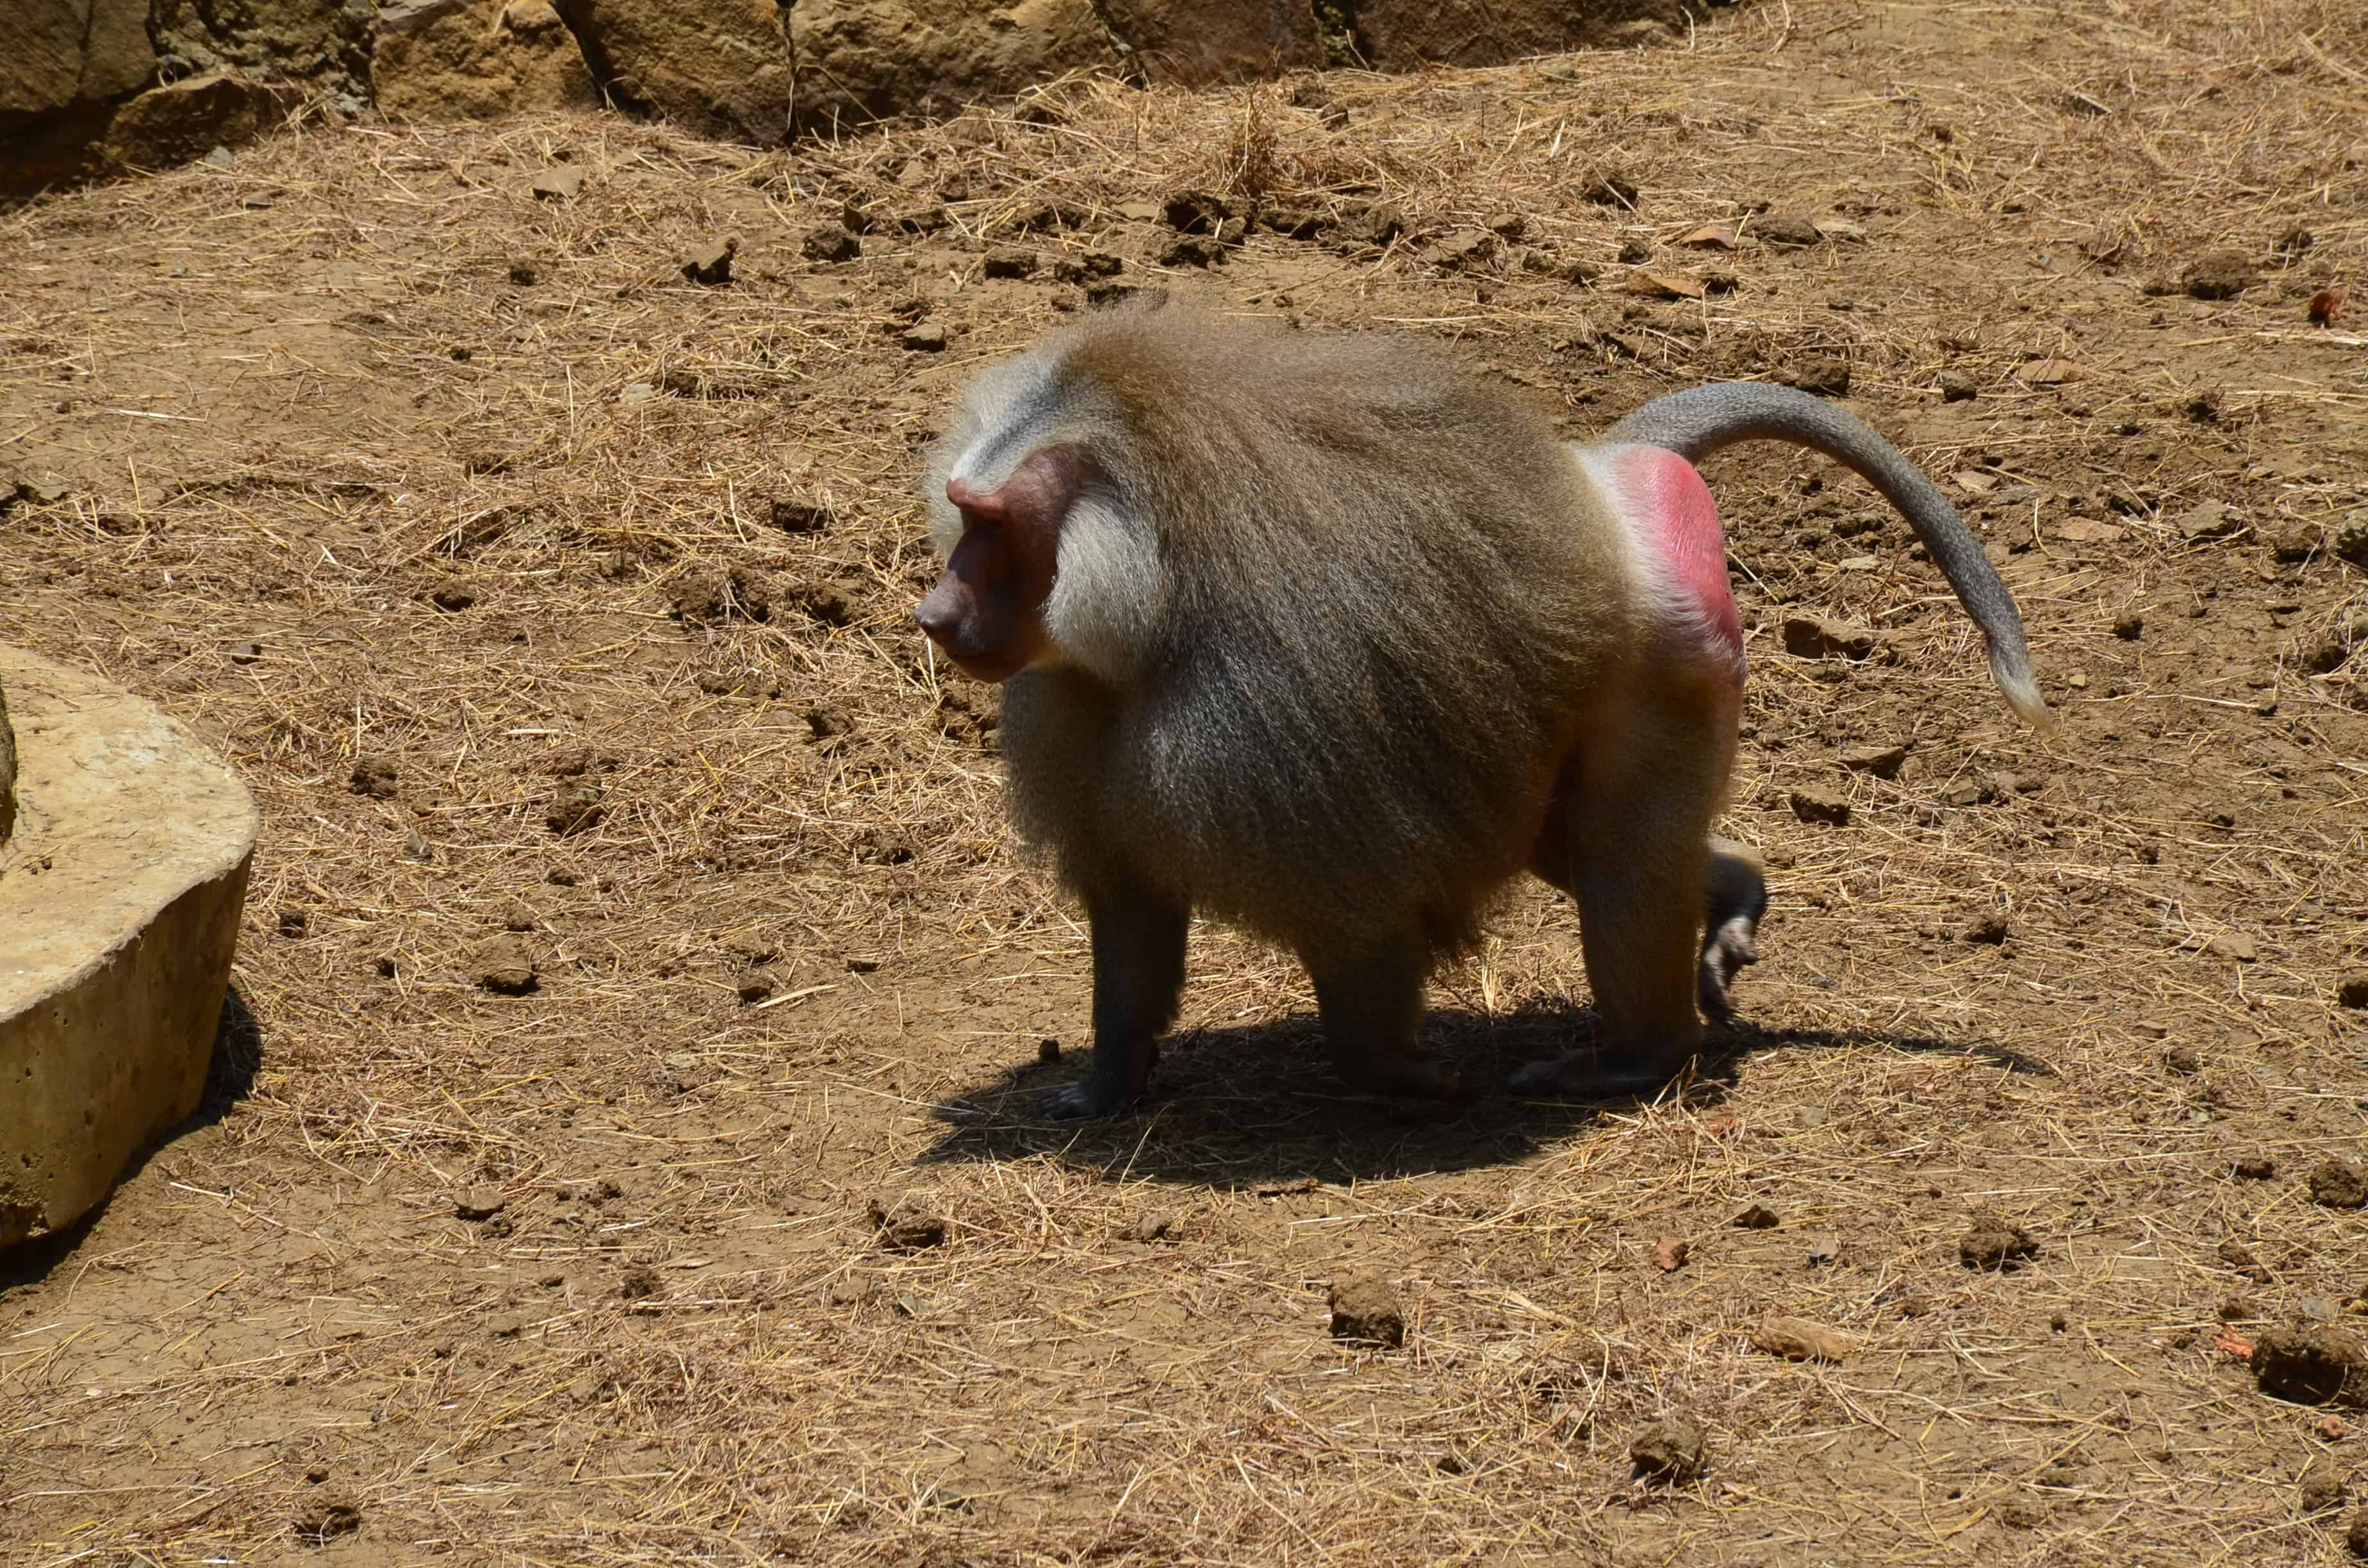 Baboon at the Cali Zoo in Colombia